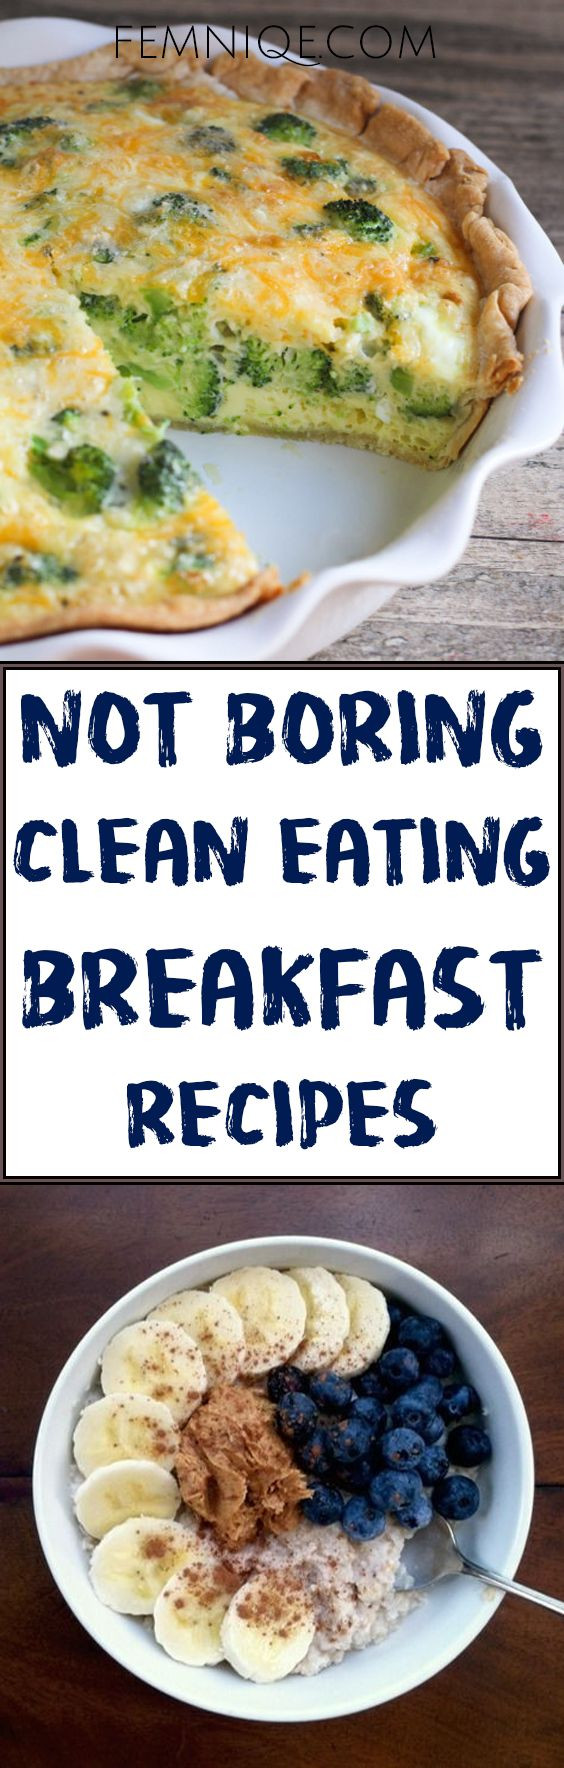 Healthy On The Go Breakfast For Weight Loss
 Best 25 Clean eating breakfast ideas on Pinterest